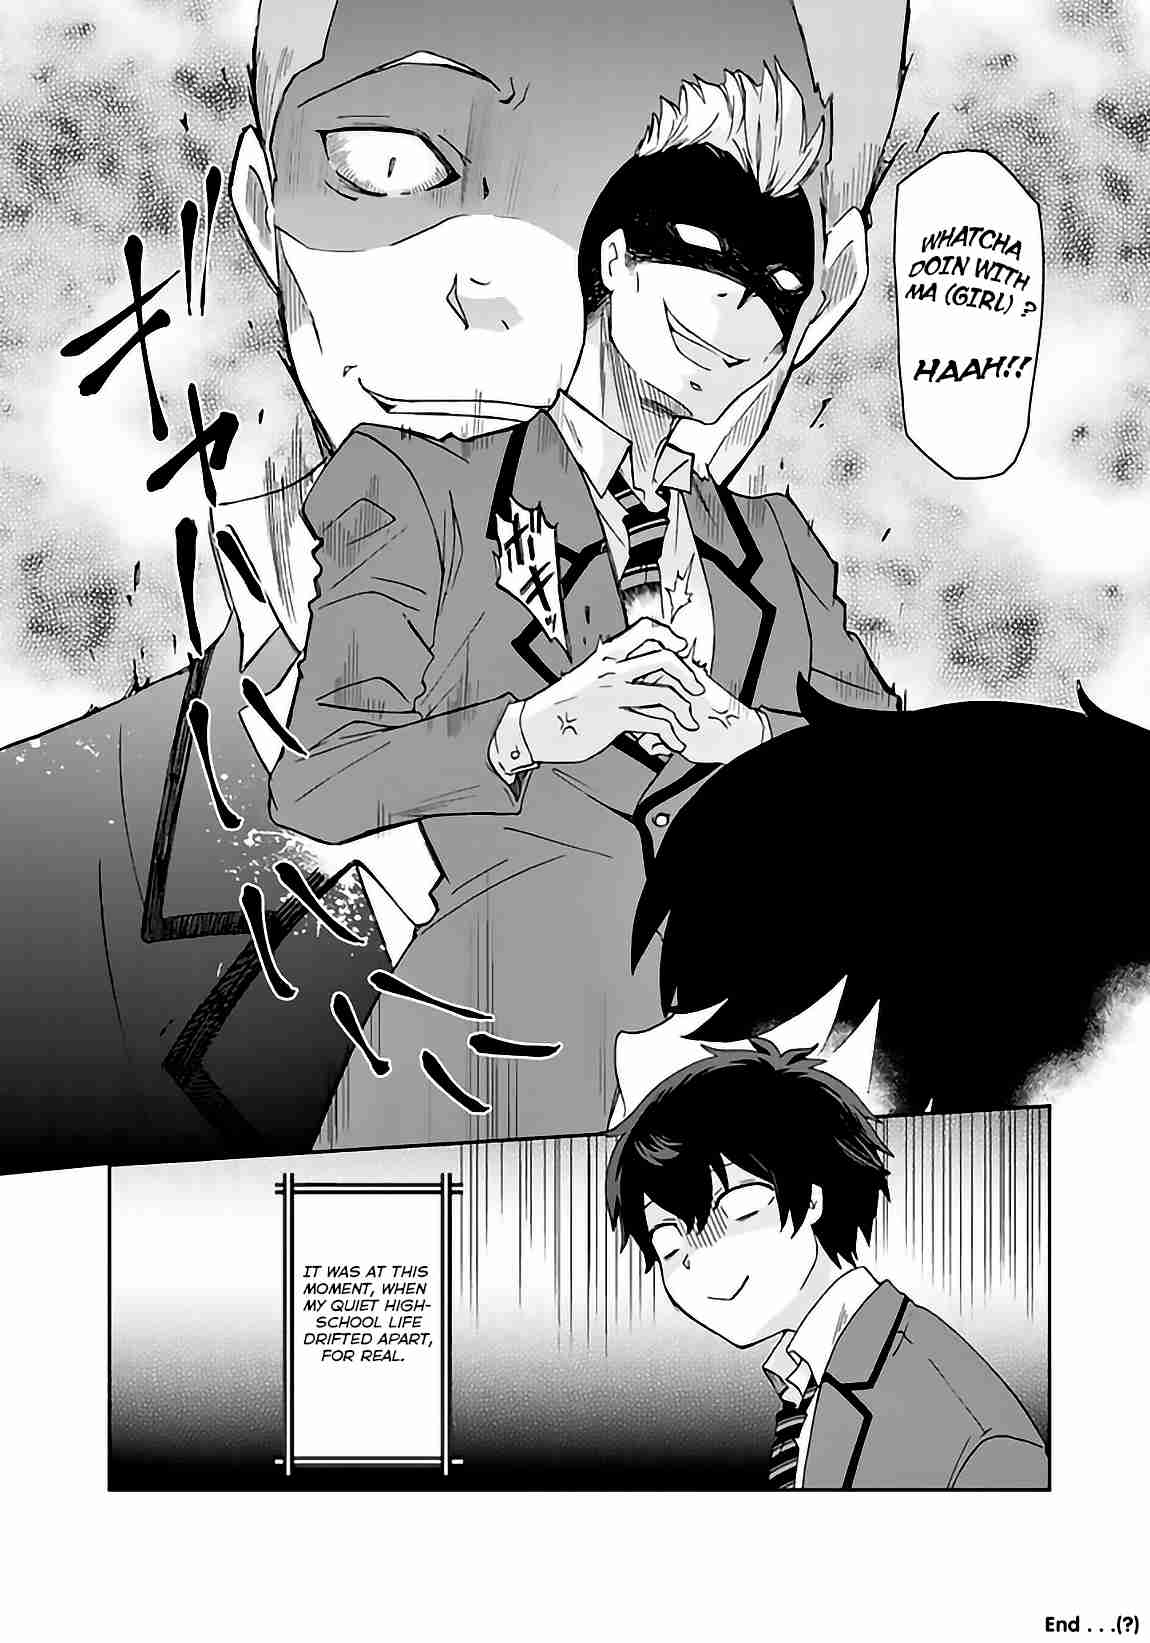 I, Who Acquired a Trash Skill 【Thermal Operator】, Became Unrivaled. Vol. 1 Ch. 1.5